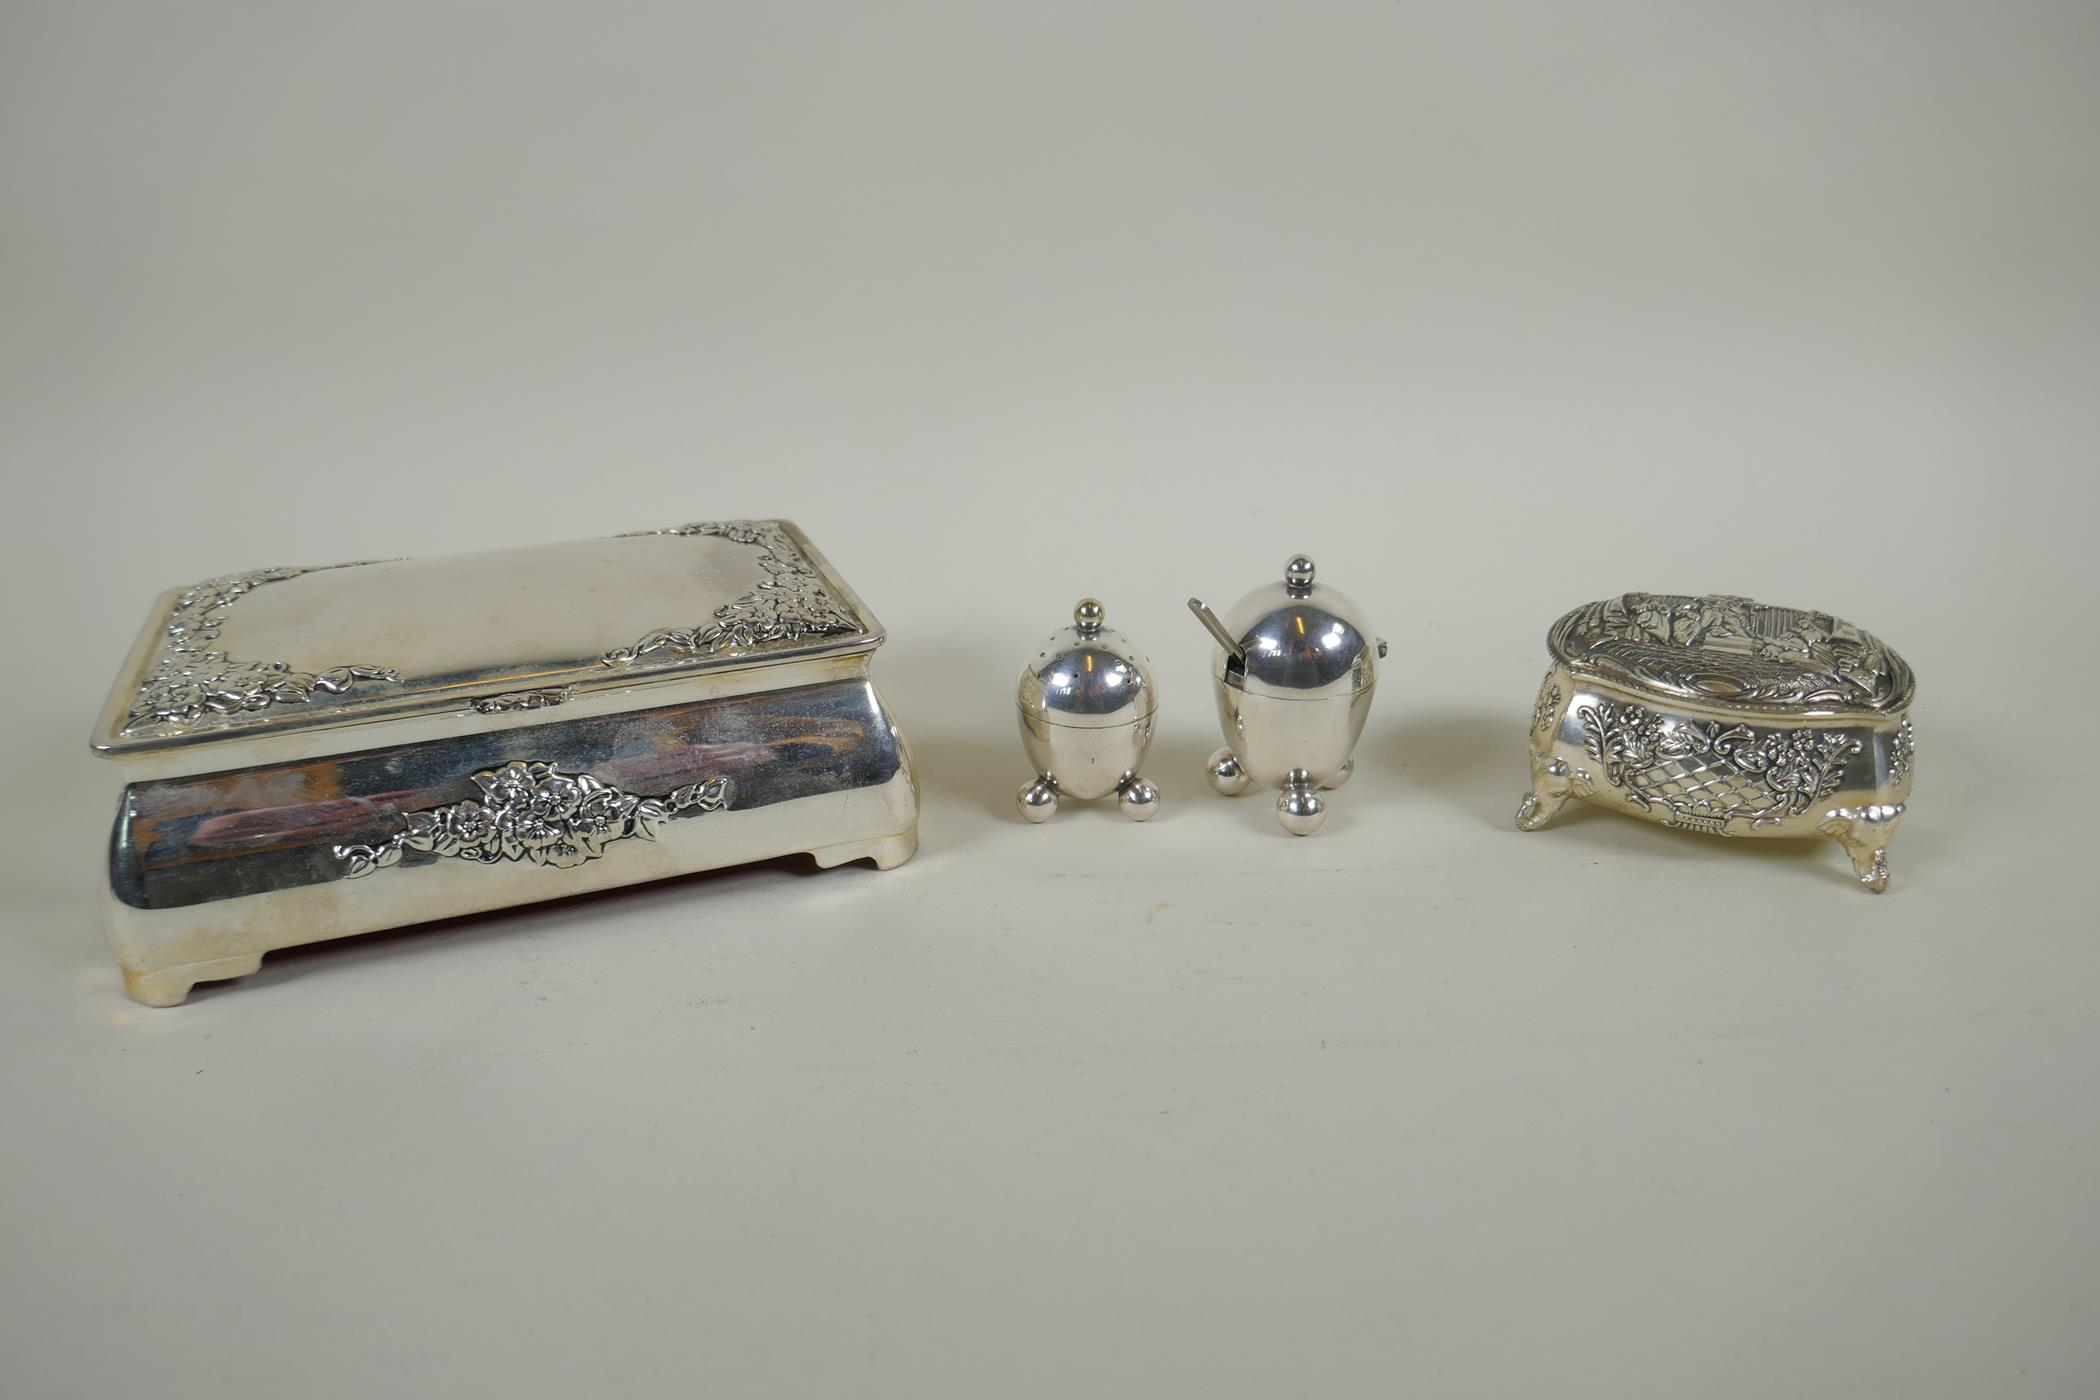 A pair of Mappin & Webb silver plated salts, a silver plated bombe shaped jewellery casket and a